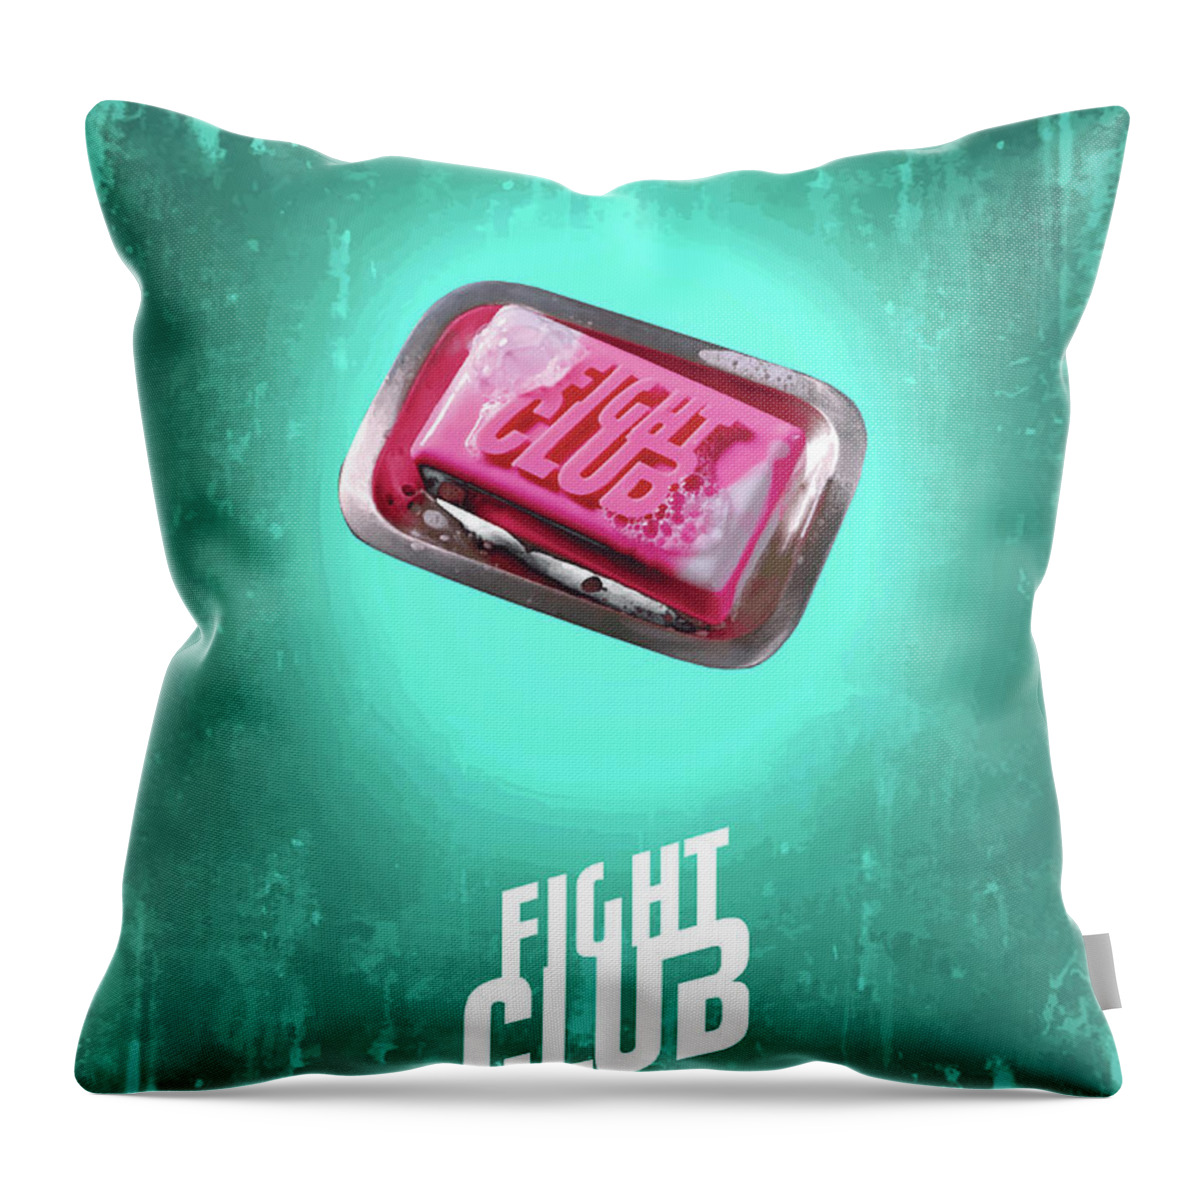 Movie Poster Throw Pillow featuring the digital art Fight Club by Bo Kev